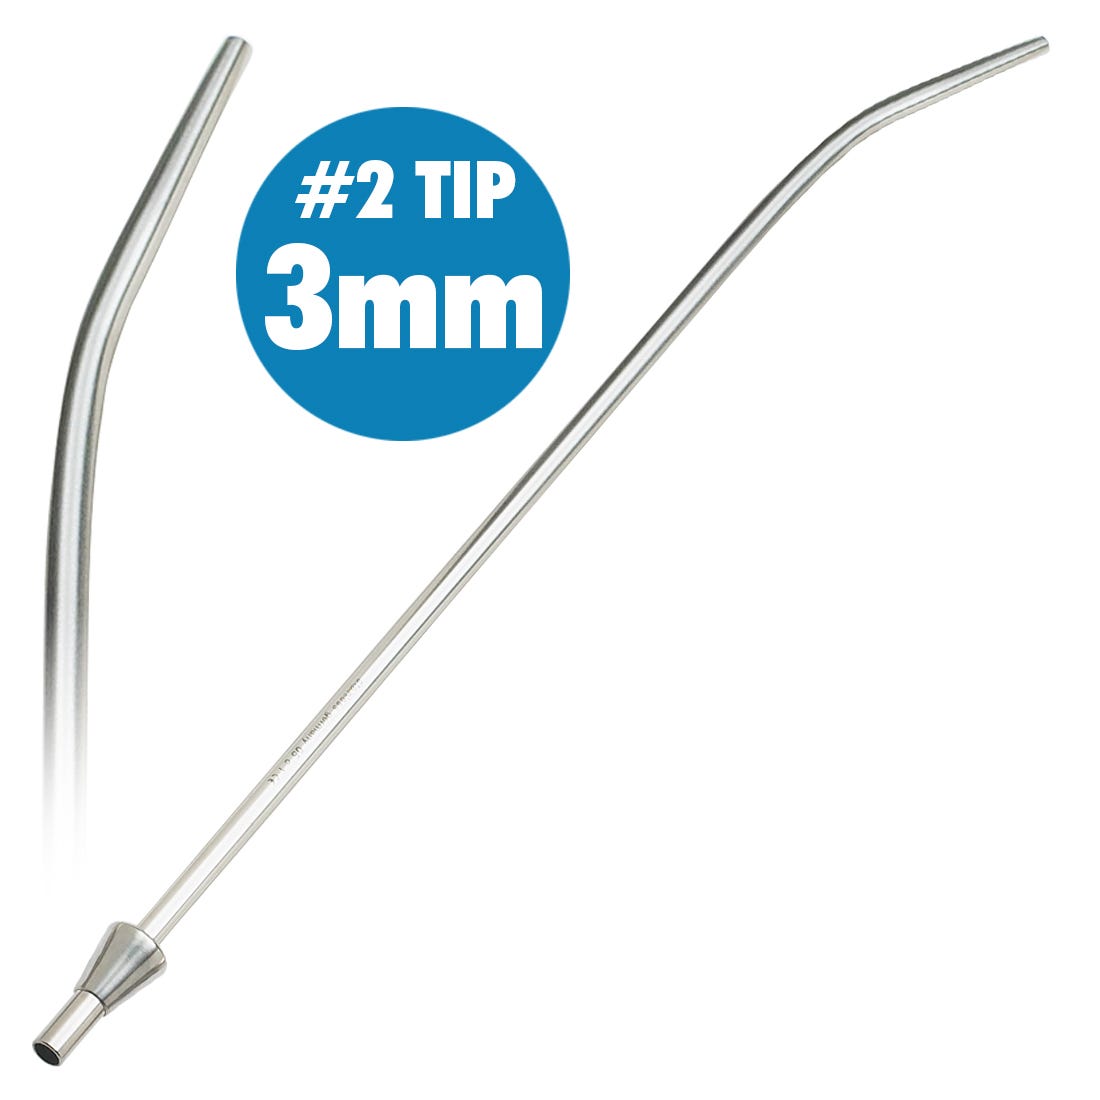 Suction Tip Size 2, 3mm opening